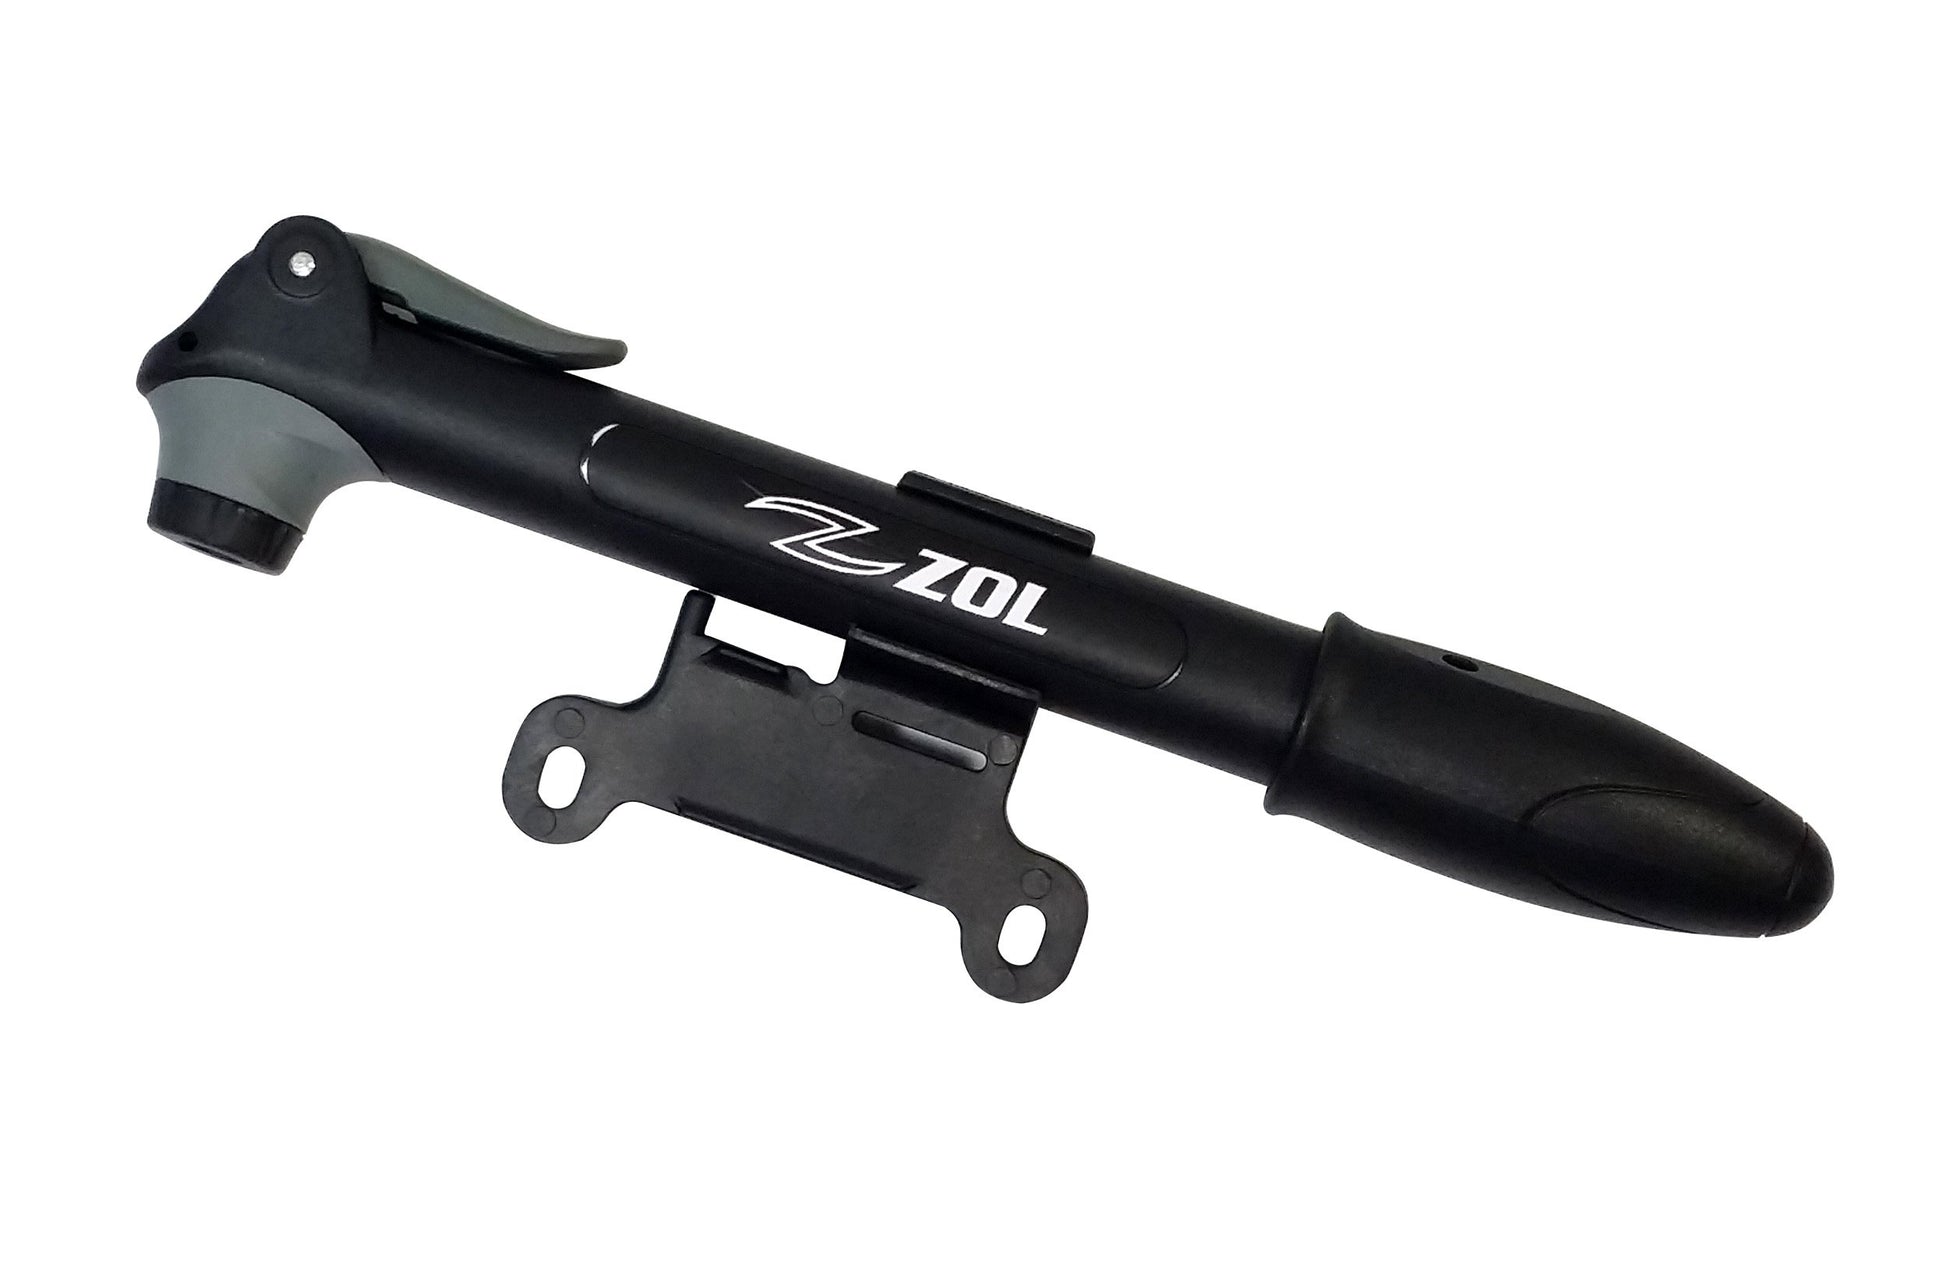 Zol Mini Bike Pump High Pressure Bicycle Pump 100psi with Frame Mount, Fits All Valves - Zol Cycling